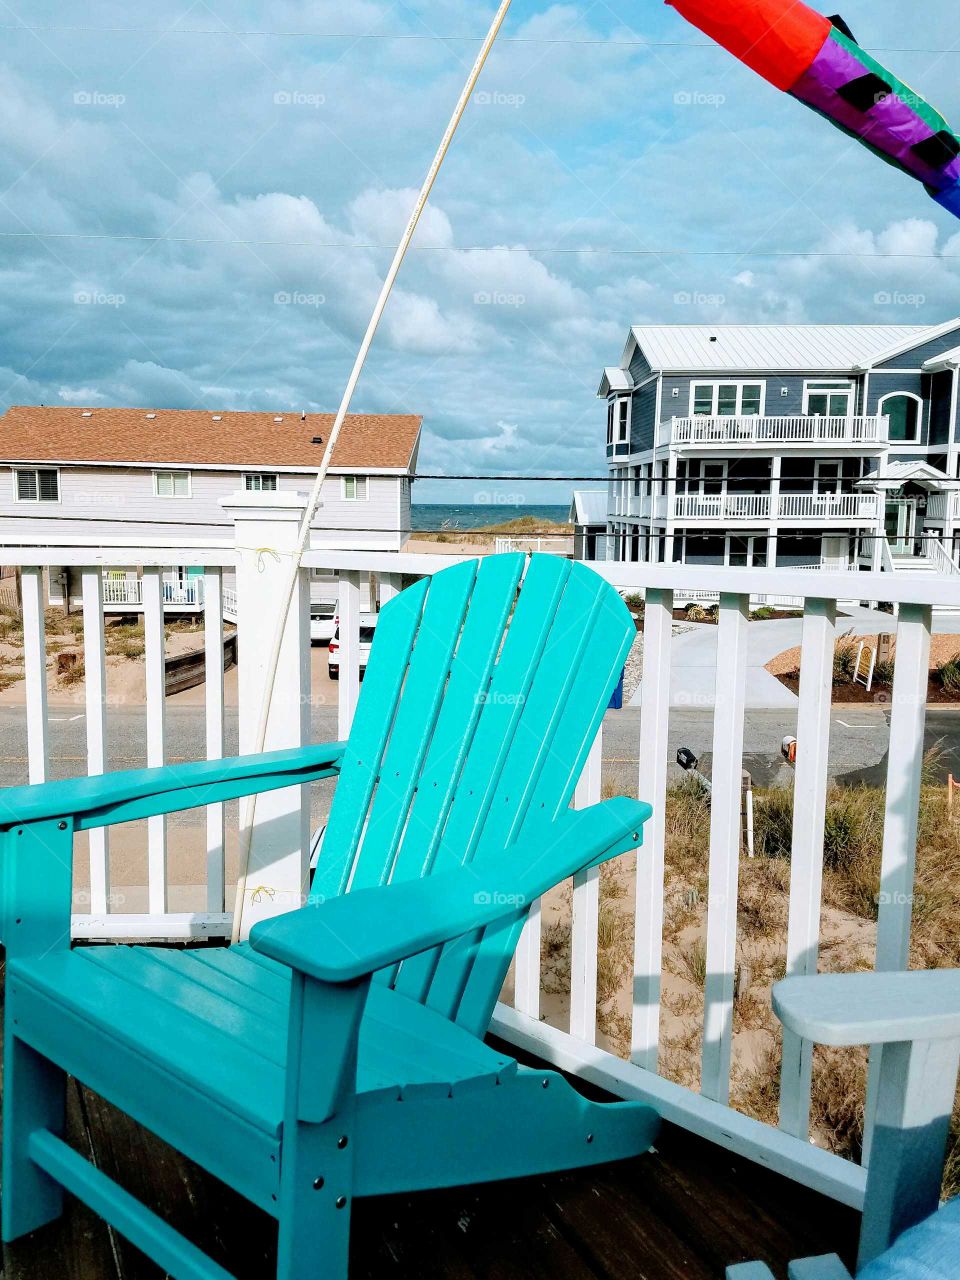 Upper Deck at the Beach House. Overlooking the Ocean.  Admire the Beach Houses...